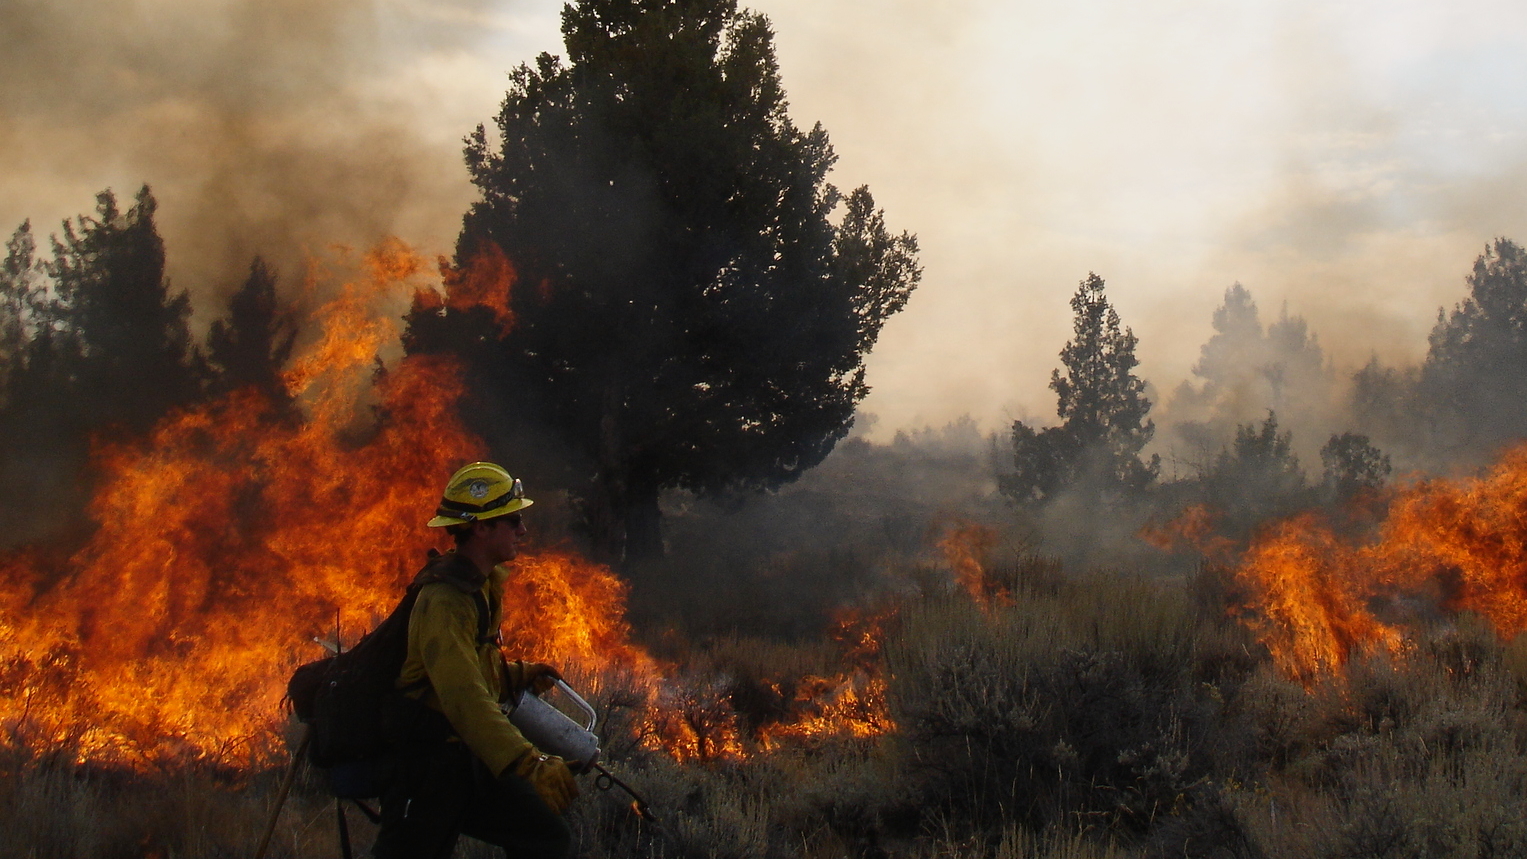 A fire crew member in yellow gear uses a fire starter while a fire burns near juniper trees in the background.